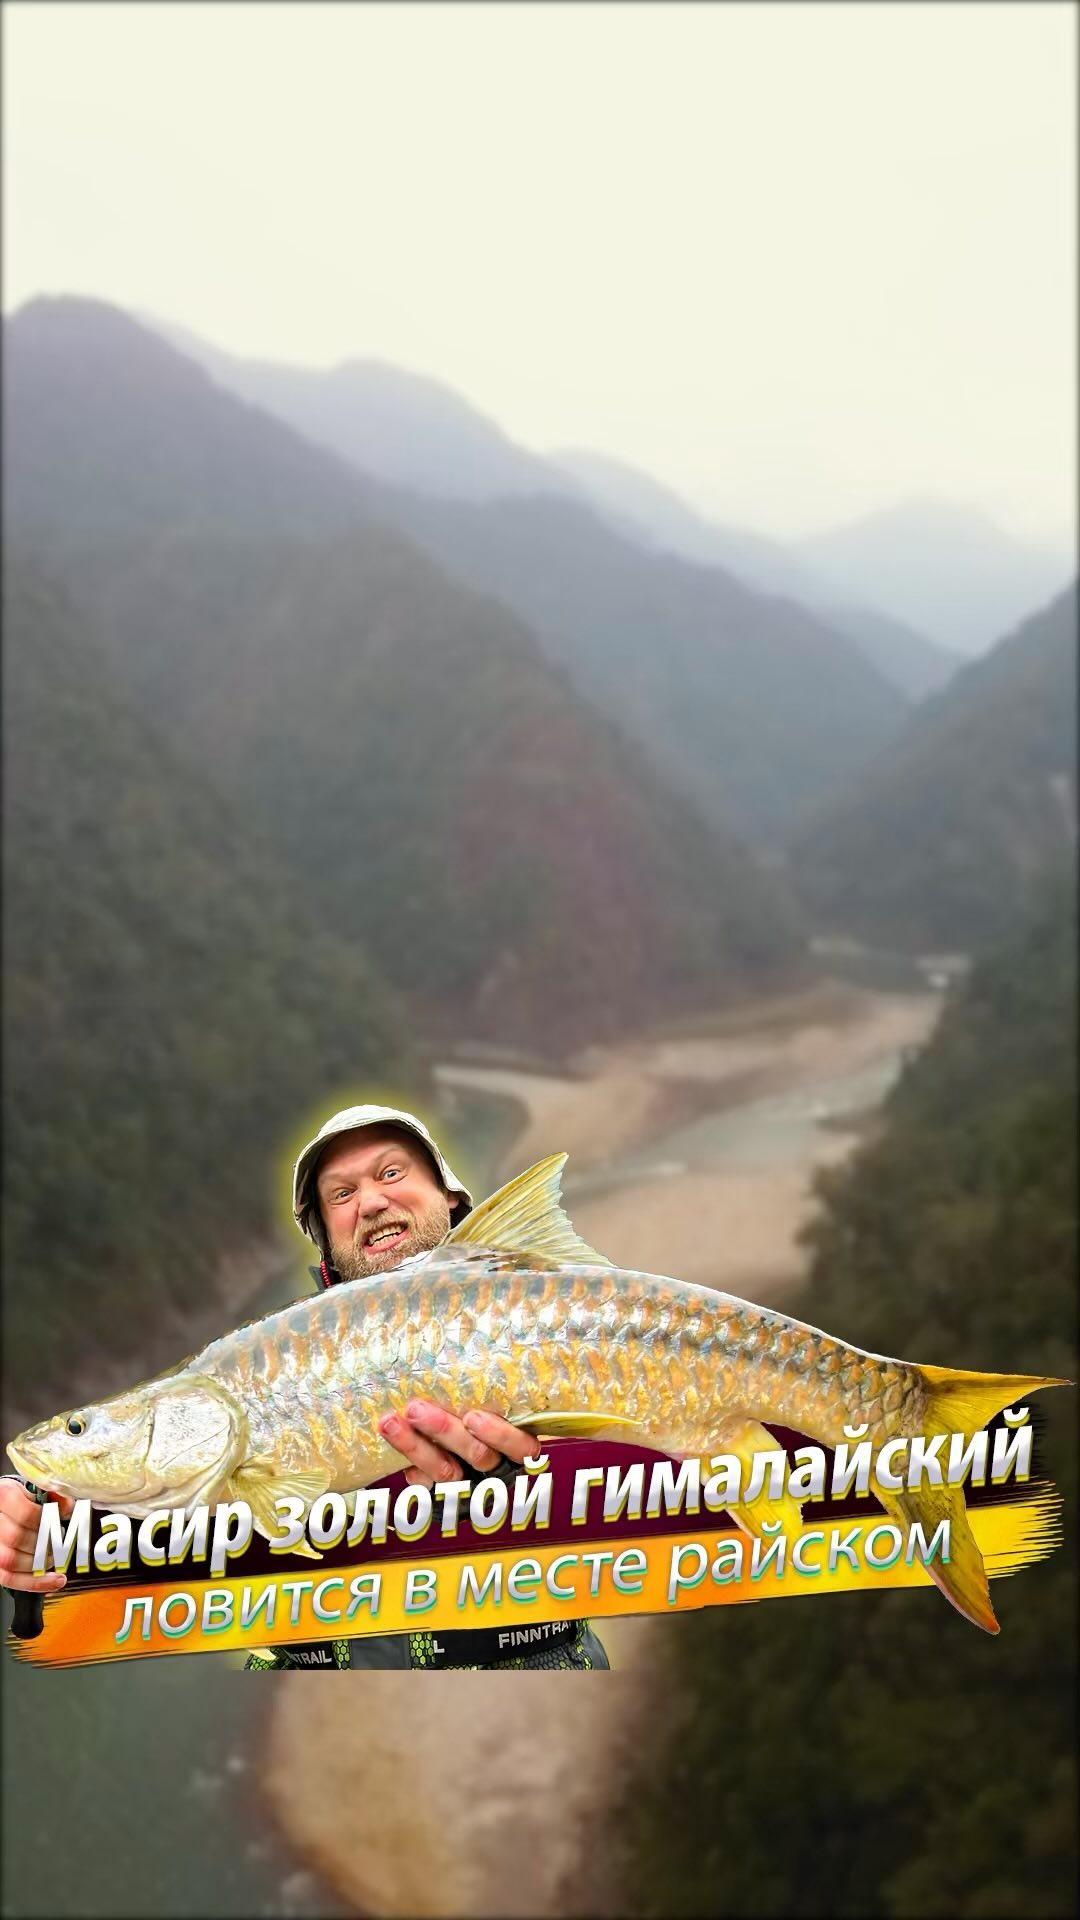 Second episode about deep mountain stream fishing in India for Golden Mahseer